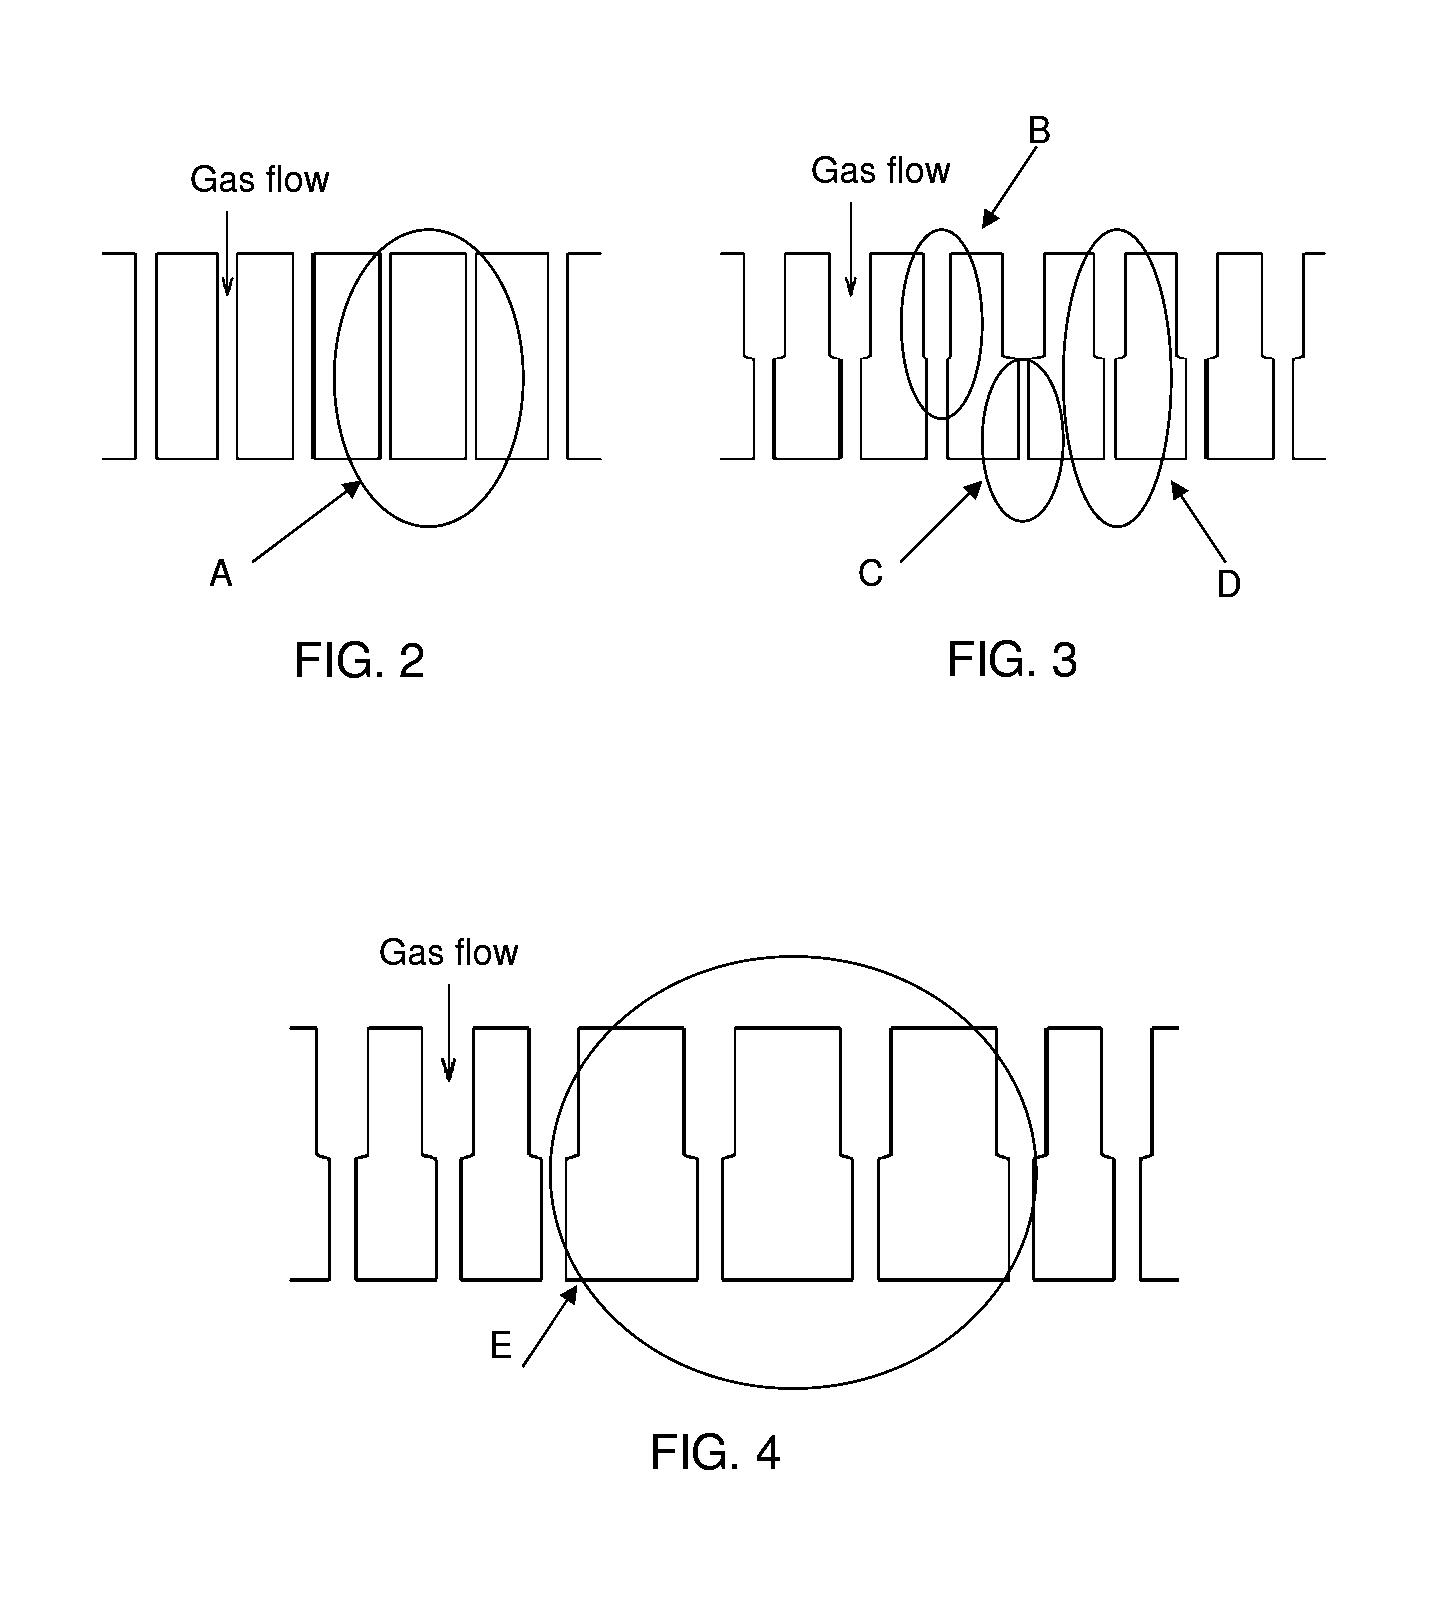 Shower Plate Having Different Aperture Dimensions and/or Distributions